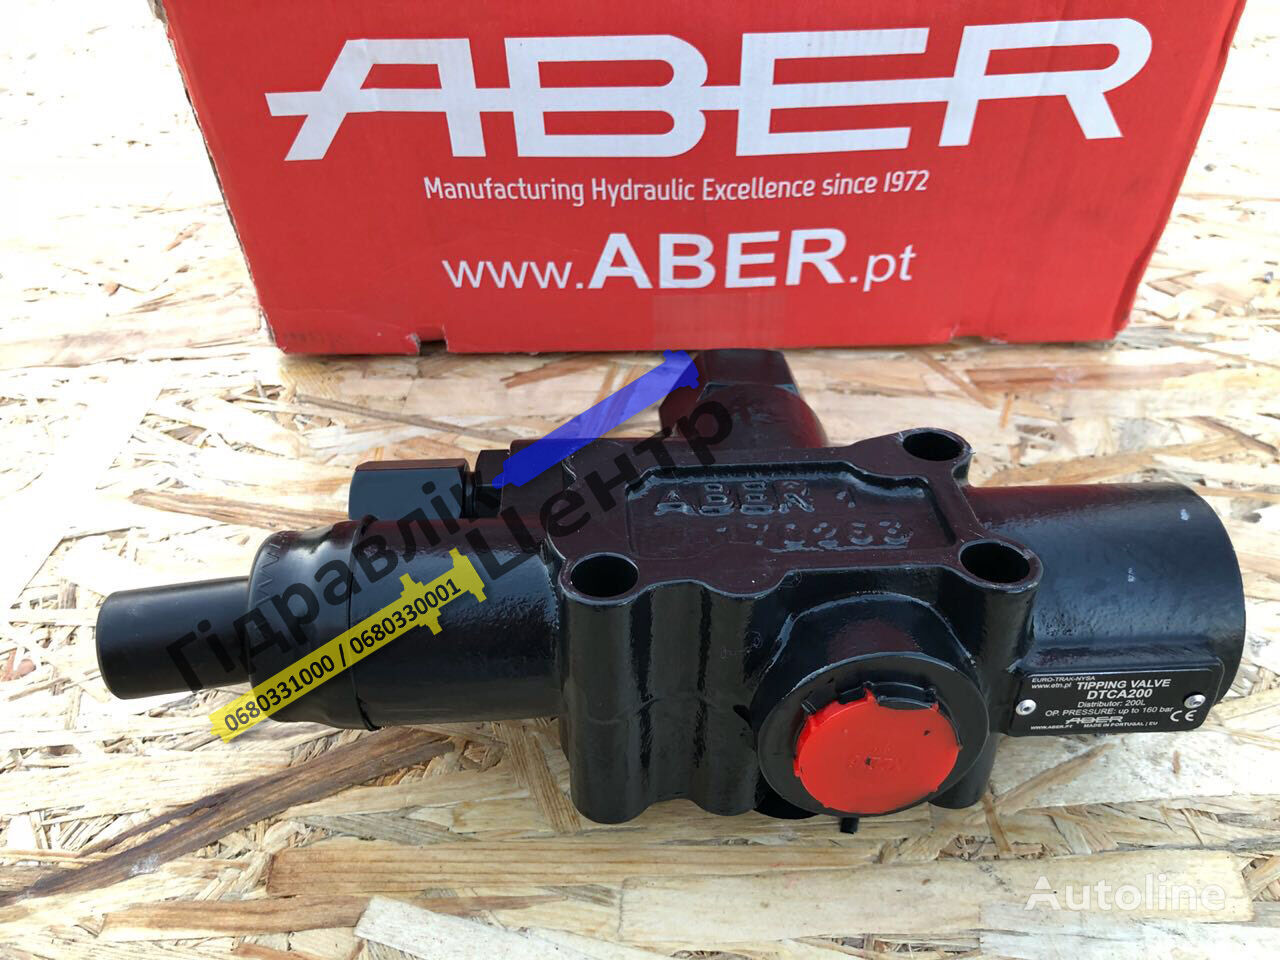 Aber DTCA 200 hydraulic distributor for truck